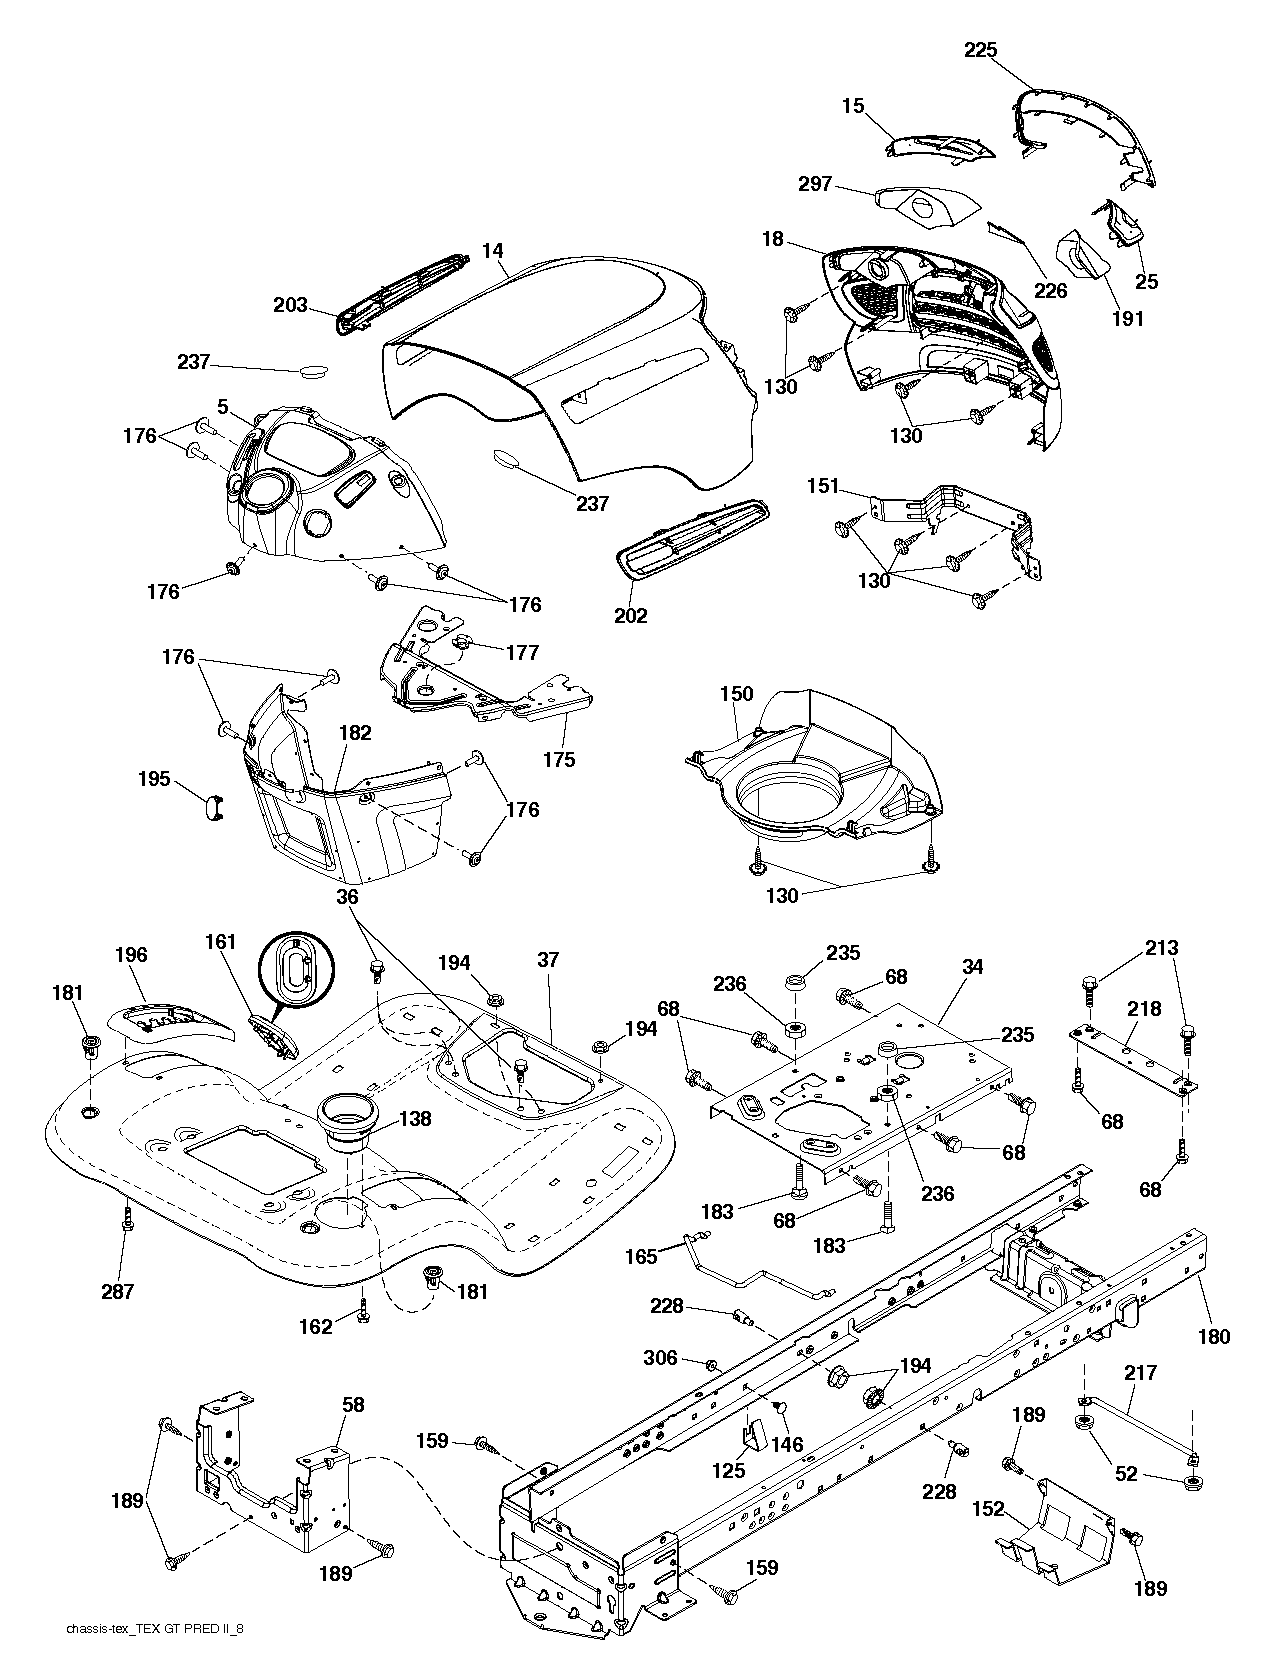 Chassis and appendix 532441882, 532448042, 581103101, 581102901, 581103001, 580910801, 596030701, 583939701, 596040501, 532412280, 596030701, 581684801, 596321701, 532409730, 581857901, 584862901, 532445494, 531169901, 817000612, 532412072, 532142432, 532196826, 532196304, 532400776, 532195227, 532415063, 532404796, 532406859, 874520520, 532428867, 581223501, 583612701, 532404137, 532414581, 581859101, 581859201, 596030501, 532409167, 532196395, 581103201, 578897101, 593824001, 532406129, 873930500, 532403704, 817600406, 581223601, 532409149